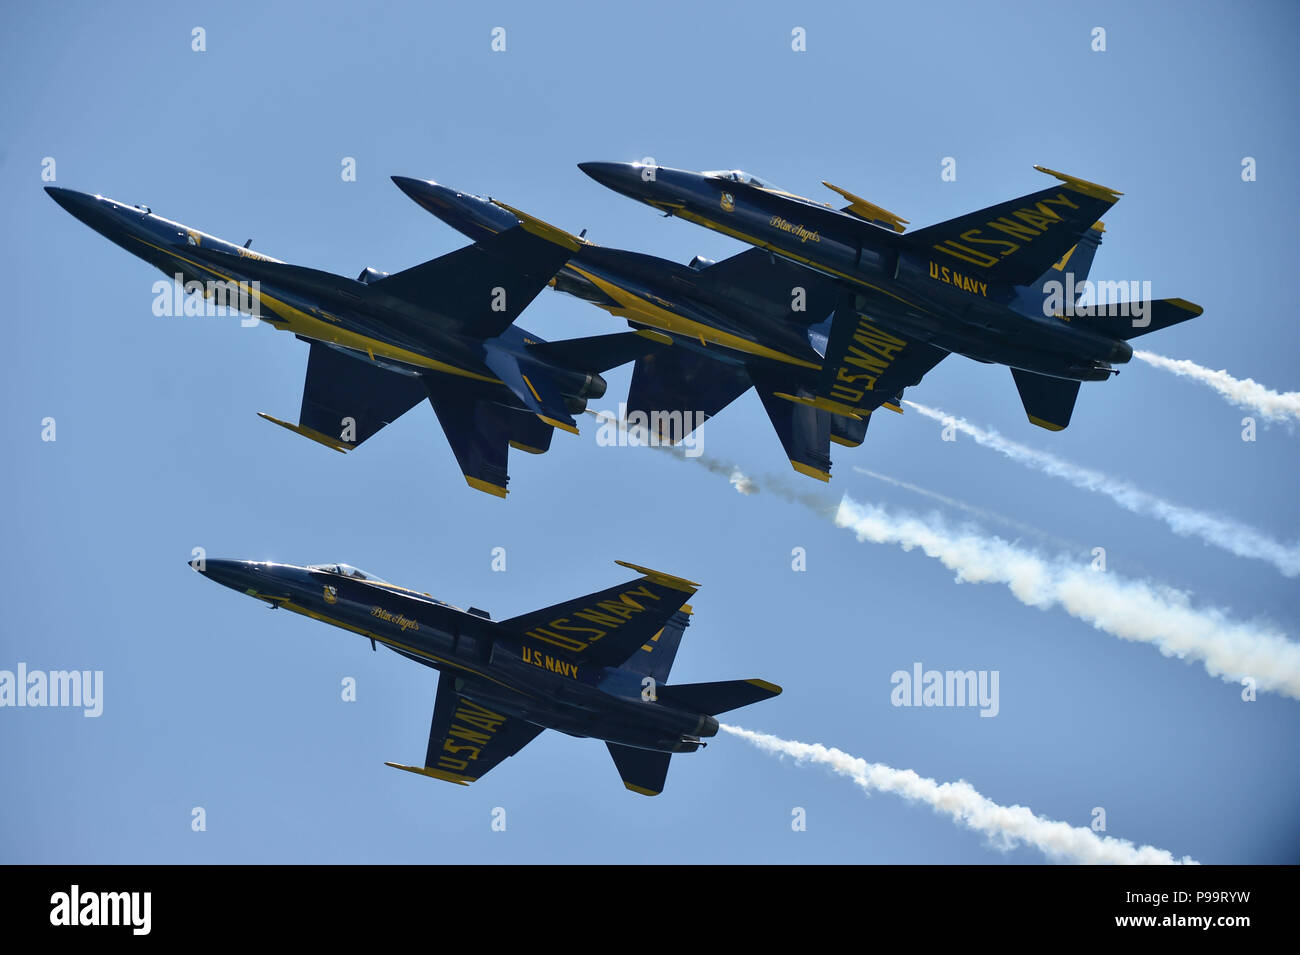 180713-N-ZC358-1195 PENSACOLA BEACH, Fla. (July 13, 2018)   The U.S. Navy flight demonstration squadron, the Blue Angels, perform the Double Farvel during the 2018 Pensacola Beach Air Show. The Blue Angels are scheduled to perform more than 60 demonstrations at more than 30 locations across the U.S. and Canada in 2018. (U.S. Navy photo by Mass Communication Specialist 2nd Class Jess Gray/Released Stock Photo